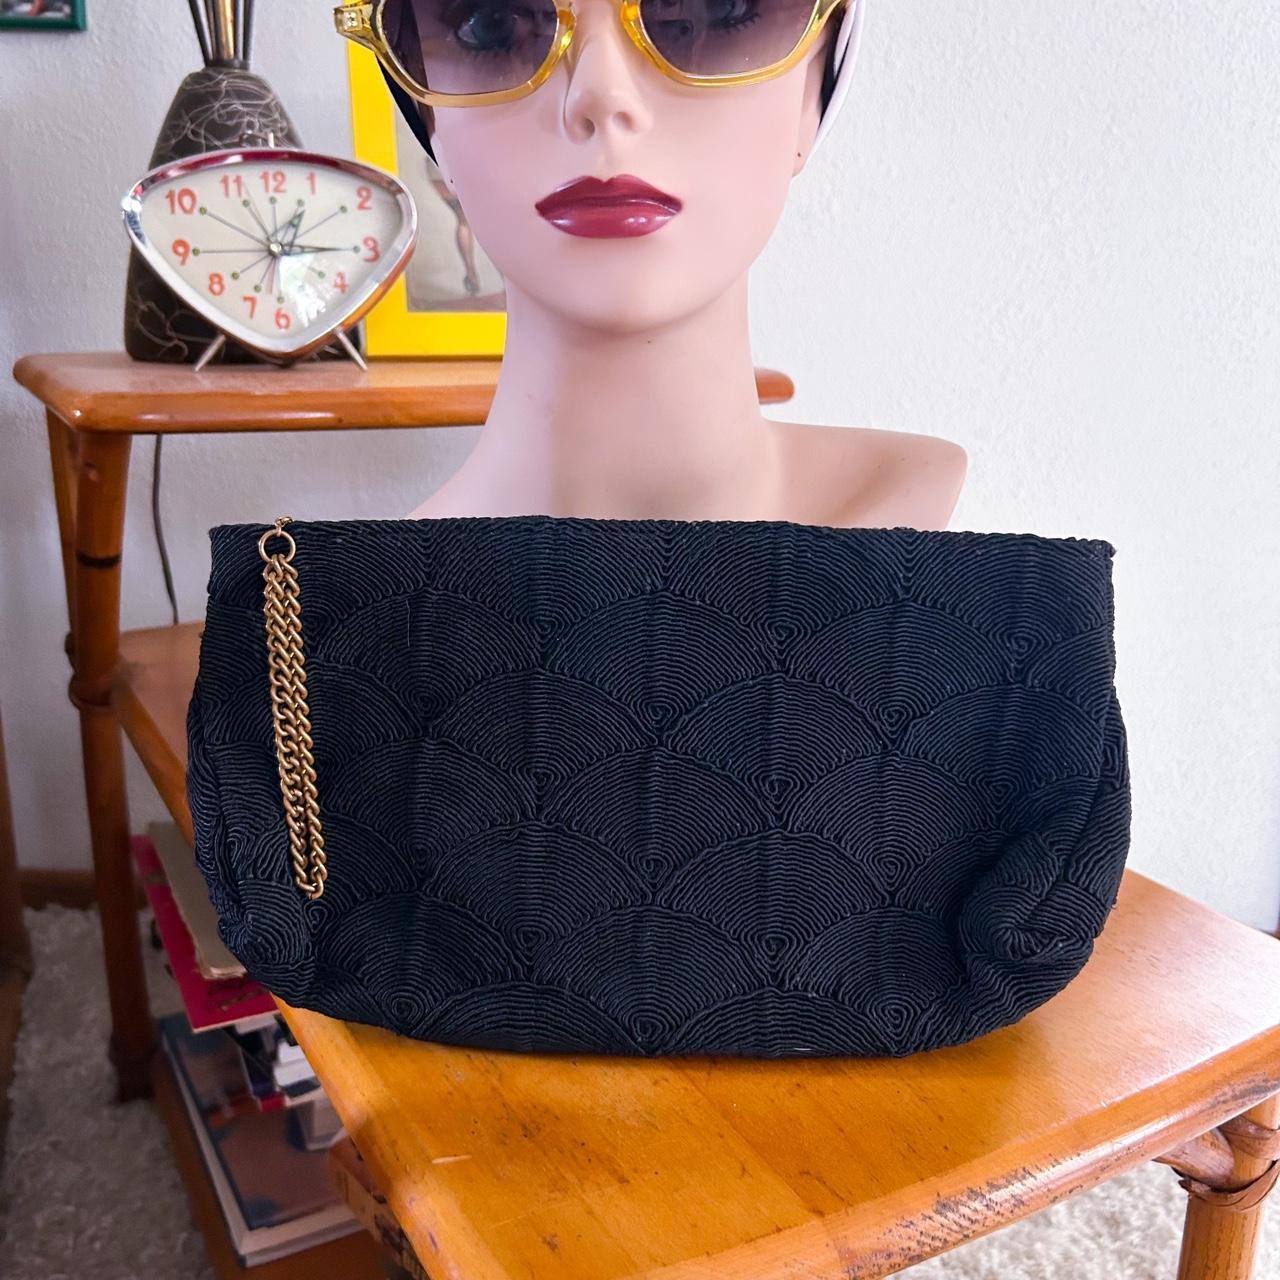 Fantastic 1940's Clutch Bags and Where to Find Them  Vintage handbags,  Purses and handbags, 1940s fashion